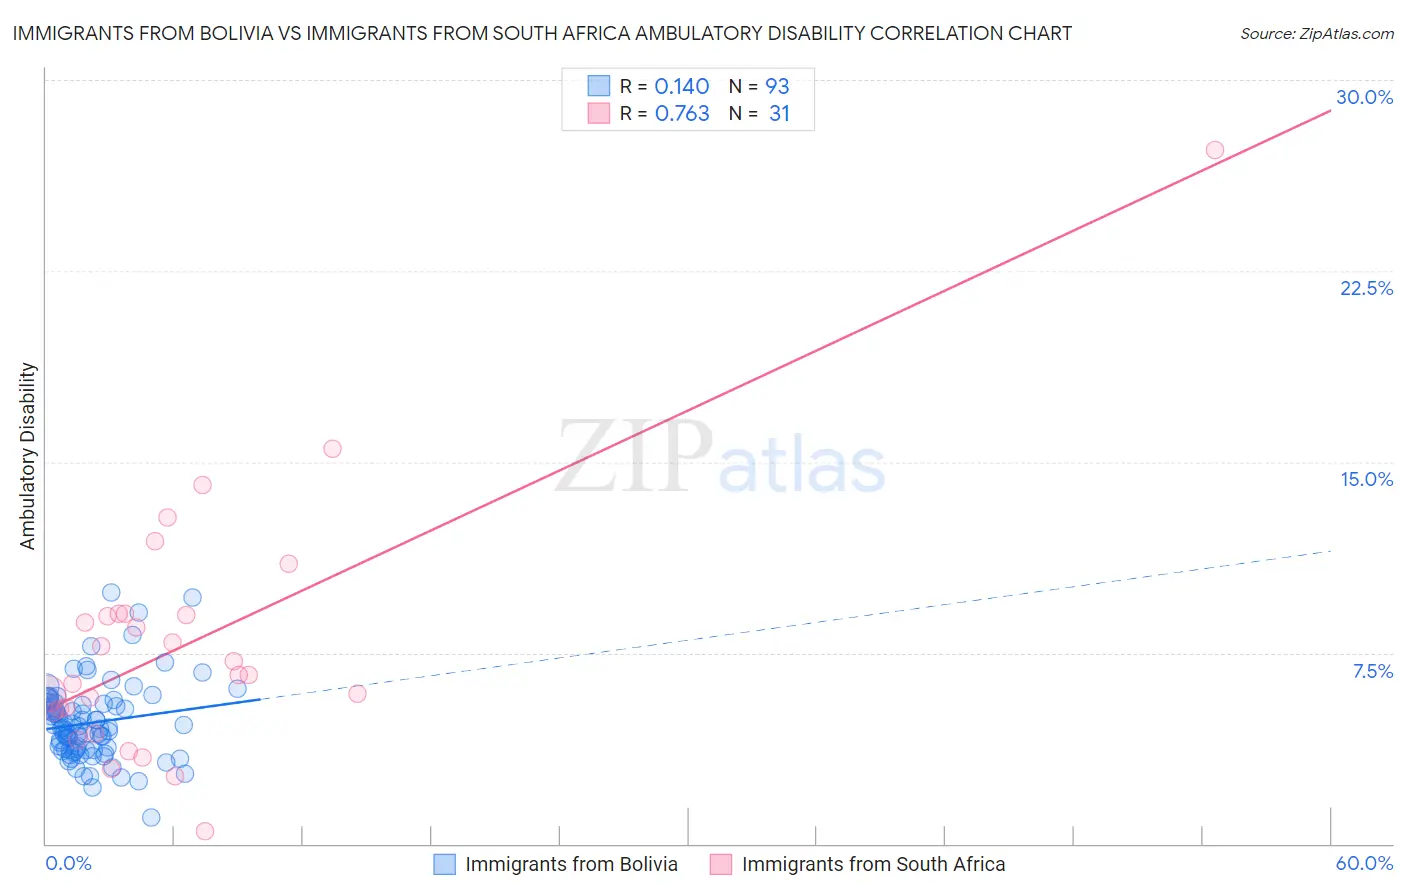 Immigrants from Bolivia vs Immigrants from South Africa Ambulatory Disability